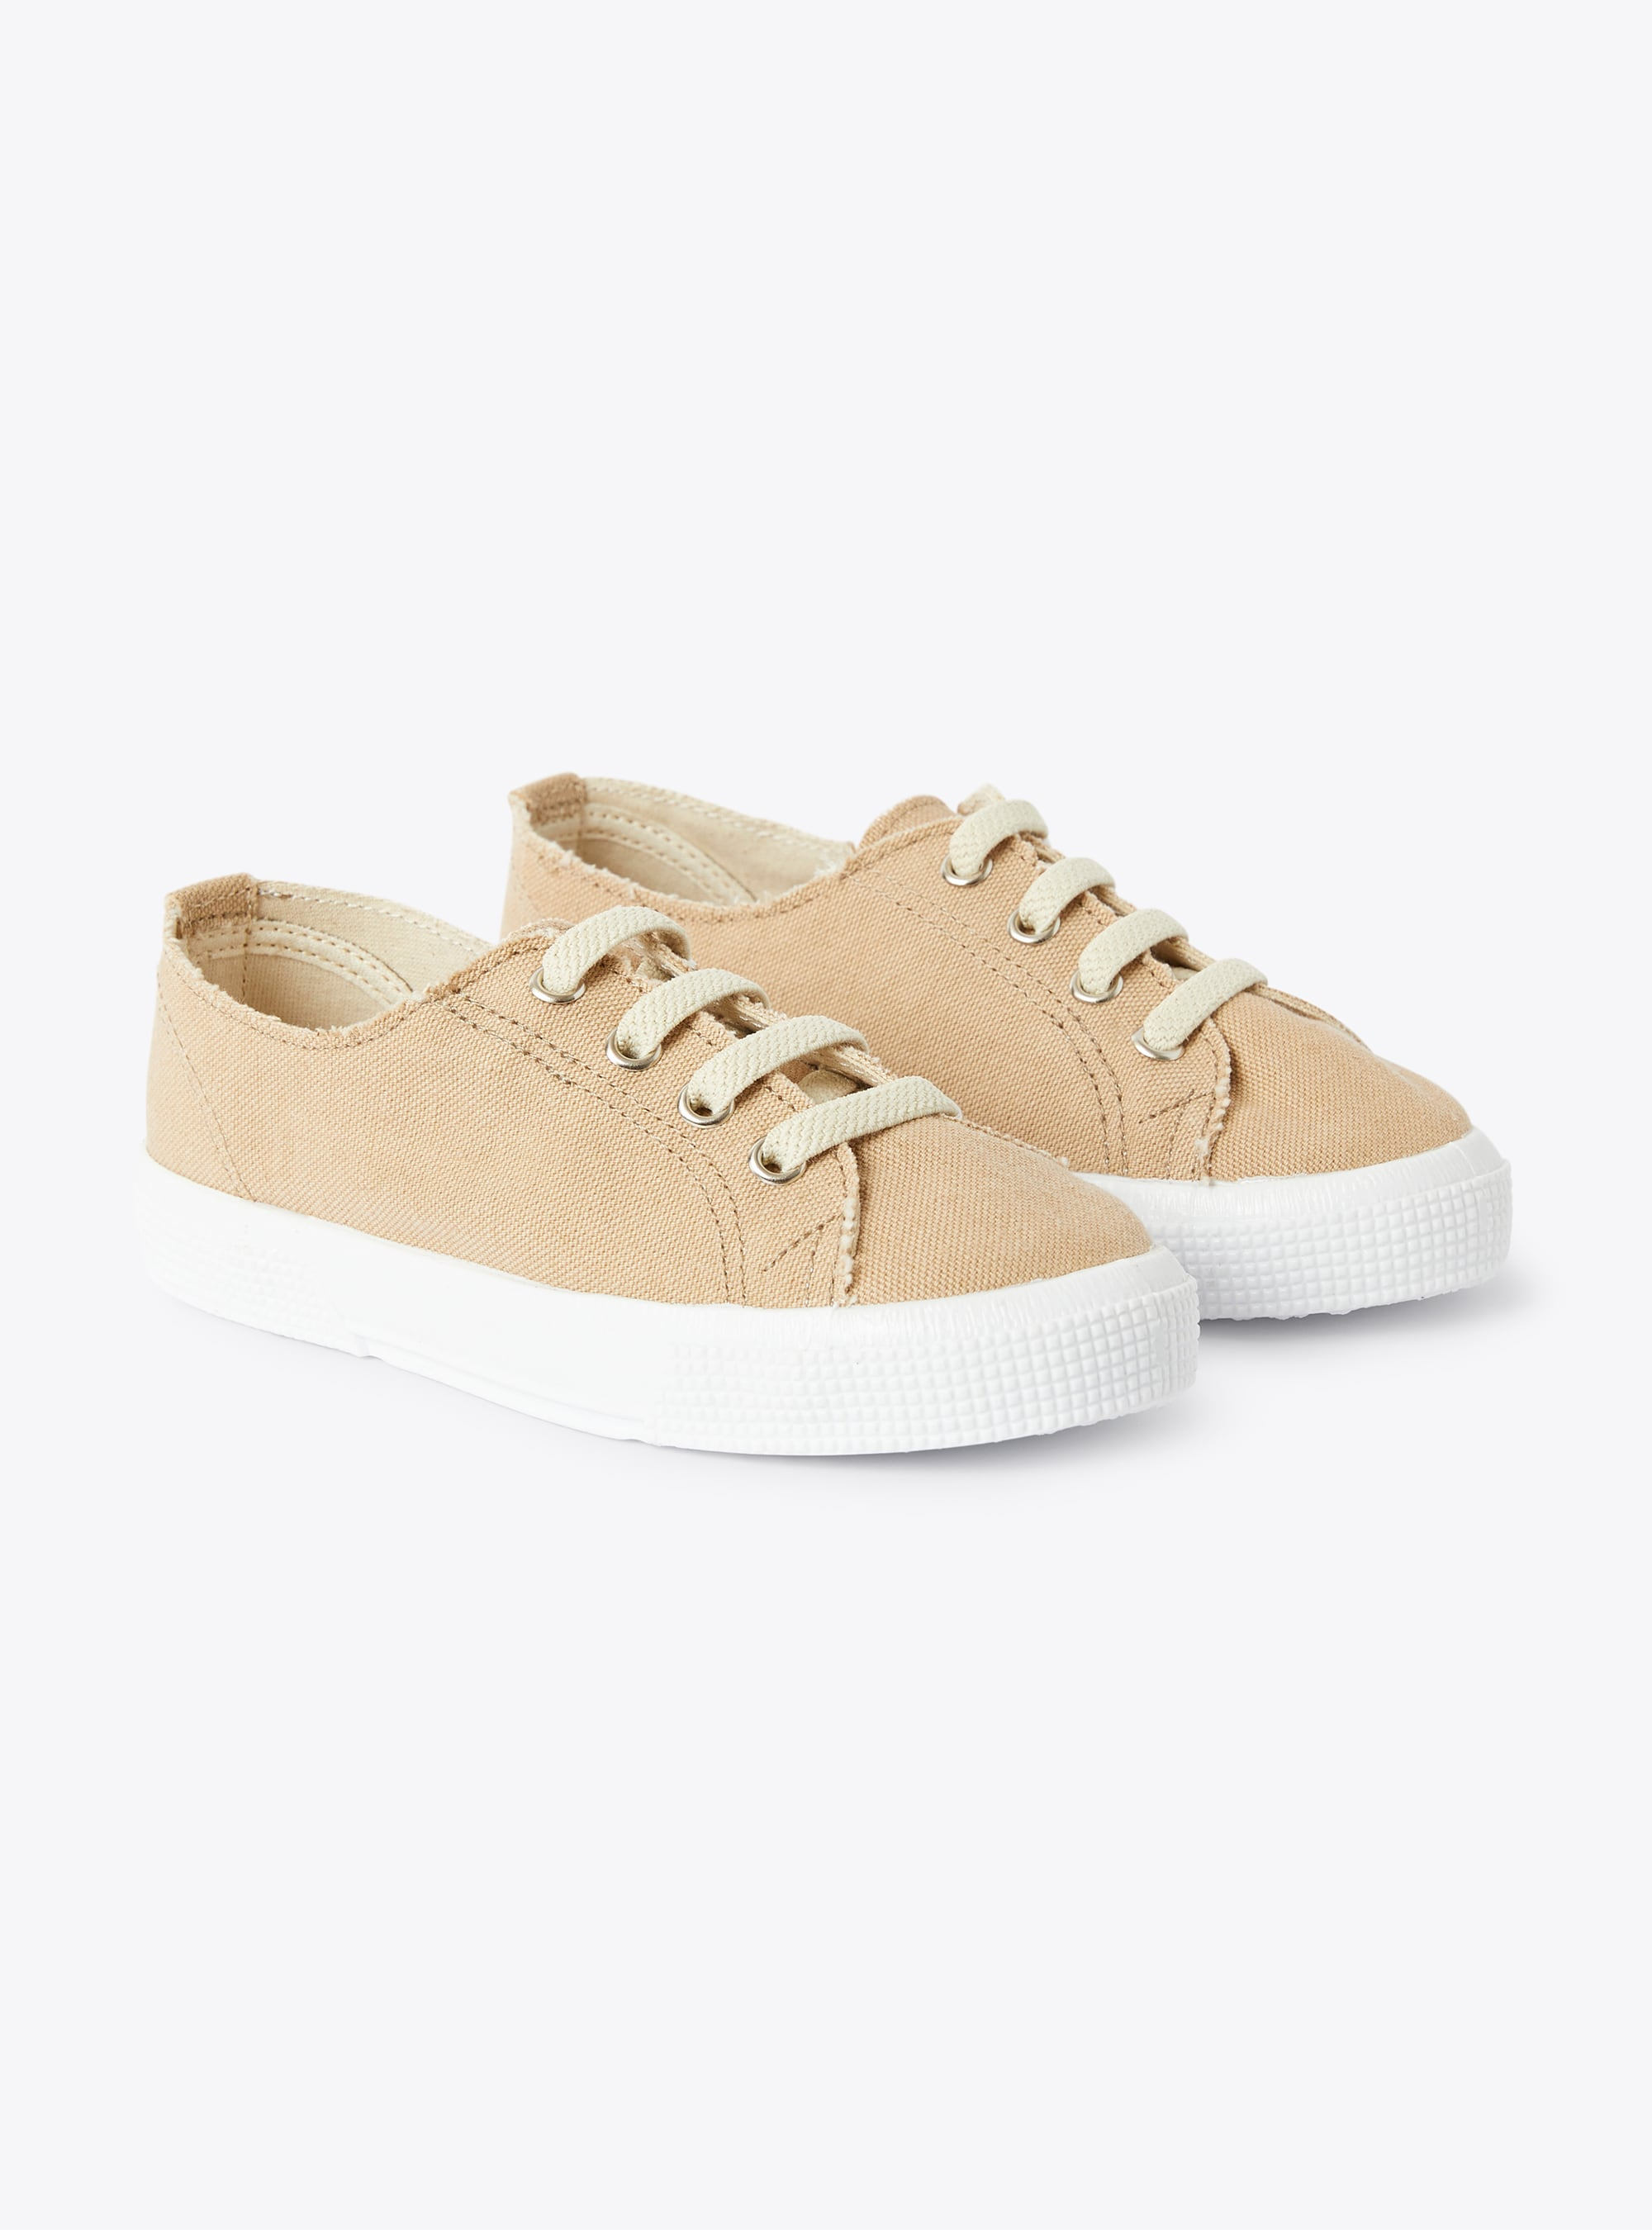 Sneakers in oatmeal-hued canvas - Shoes - Il Gufo